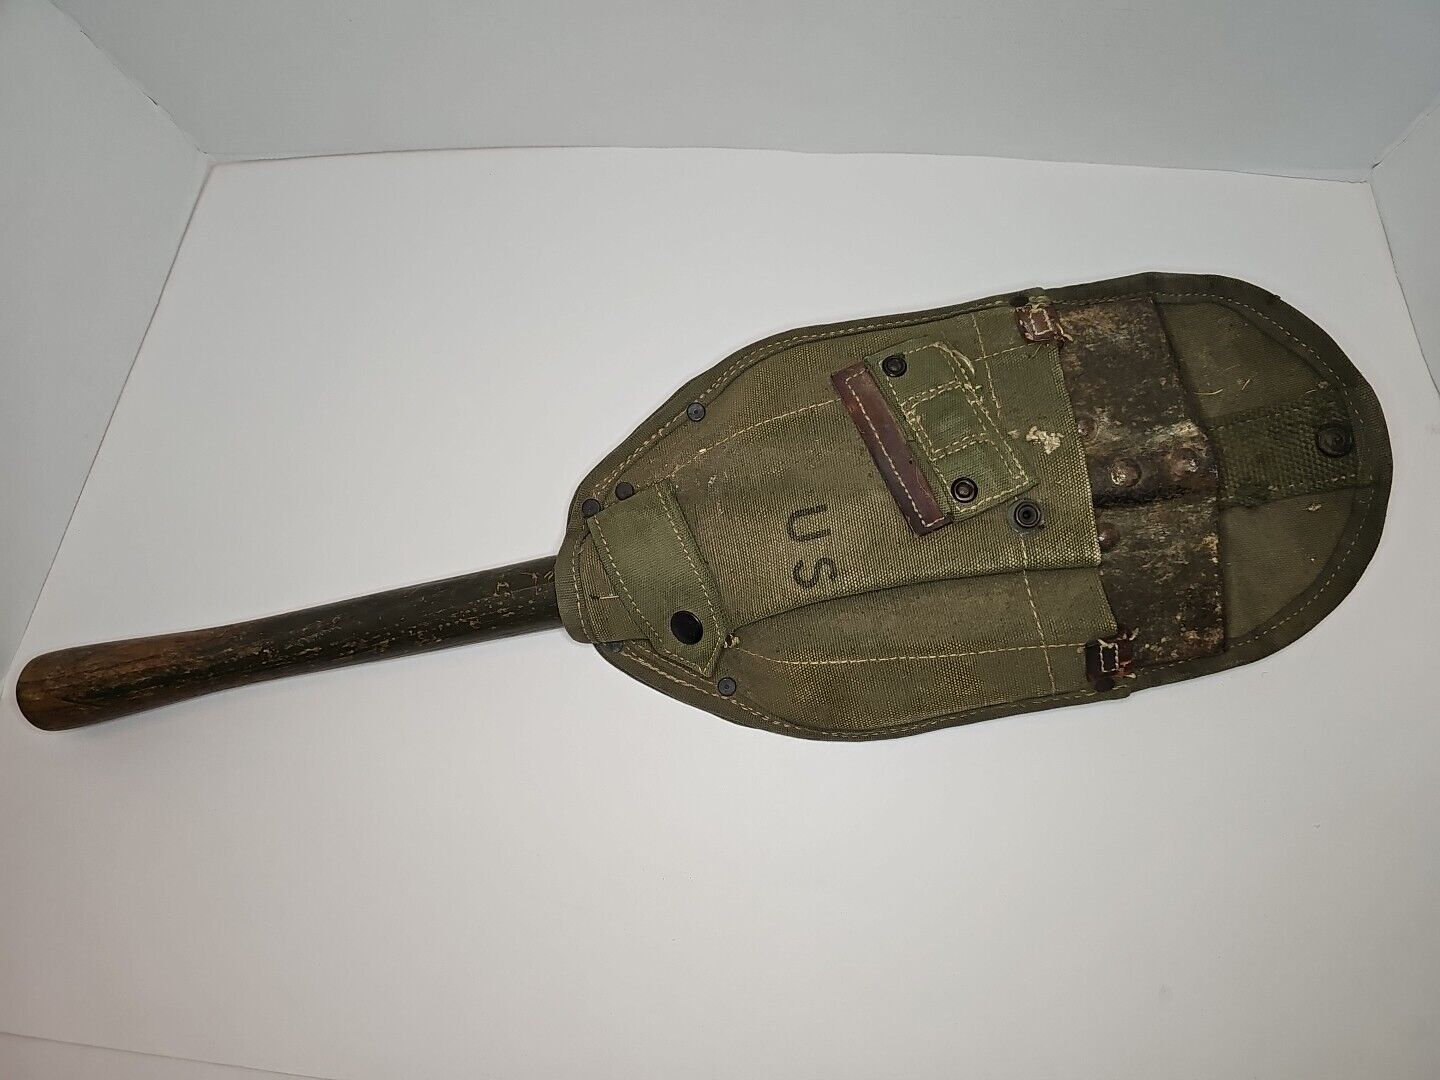 VTG WWII TRENCH SHOVEL w/ Canvas Sleeve